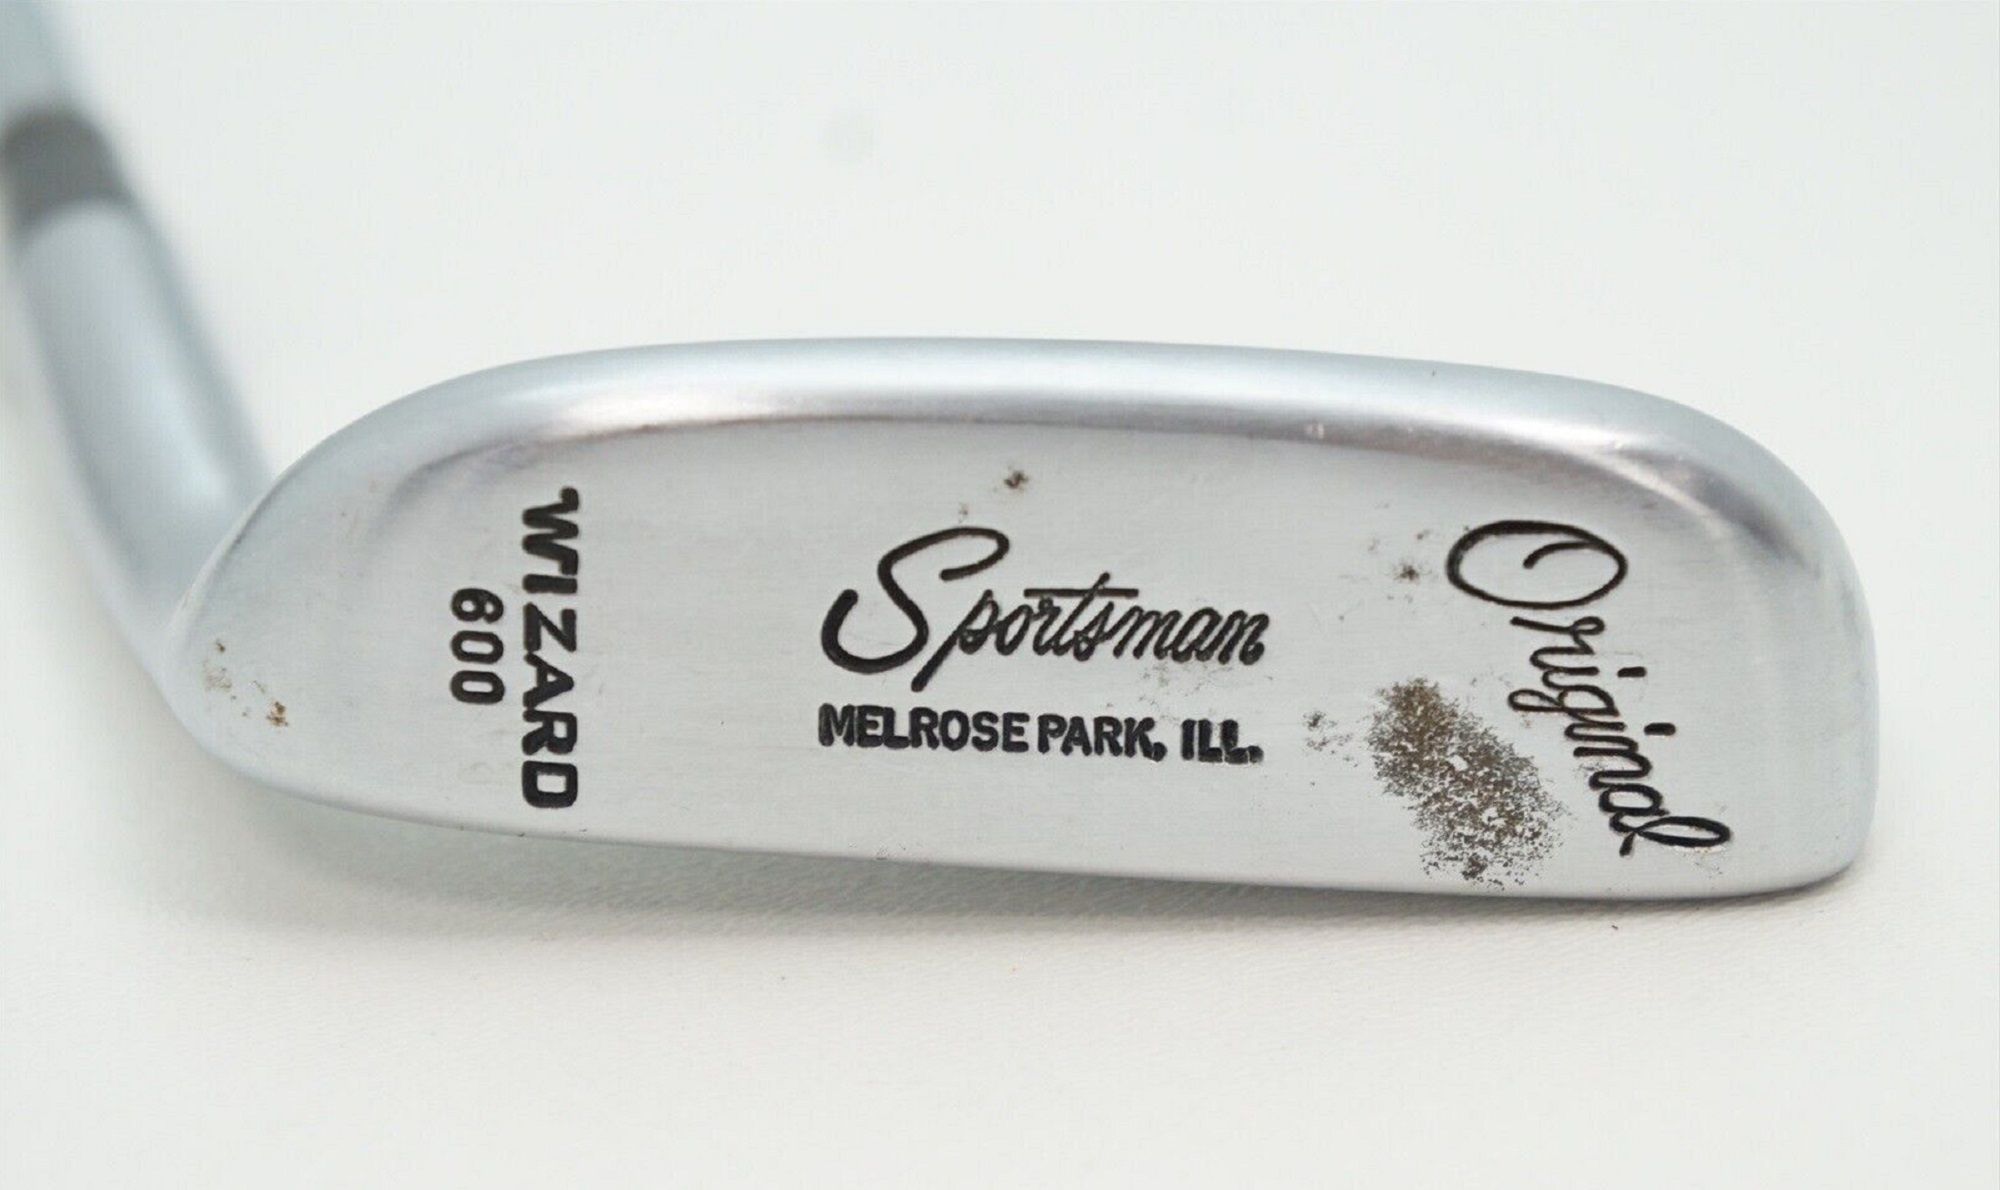 A close-up of the George Low Wizard putter